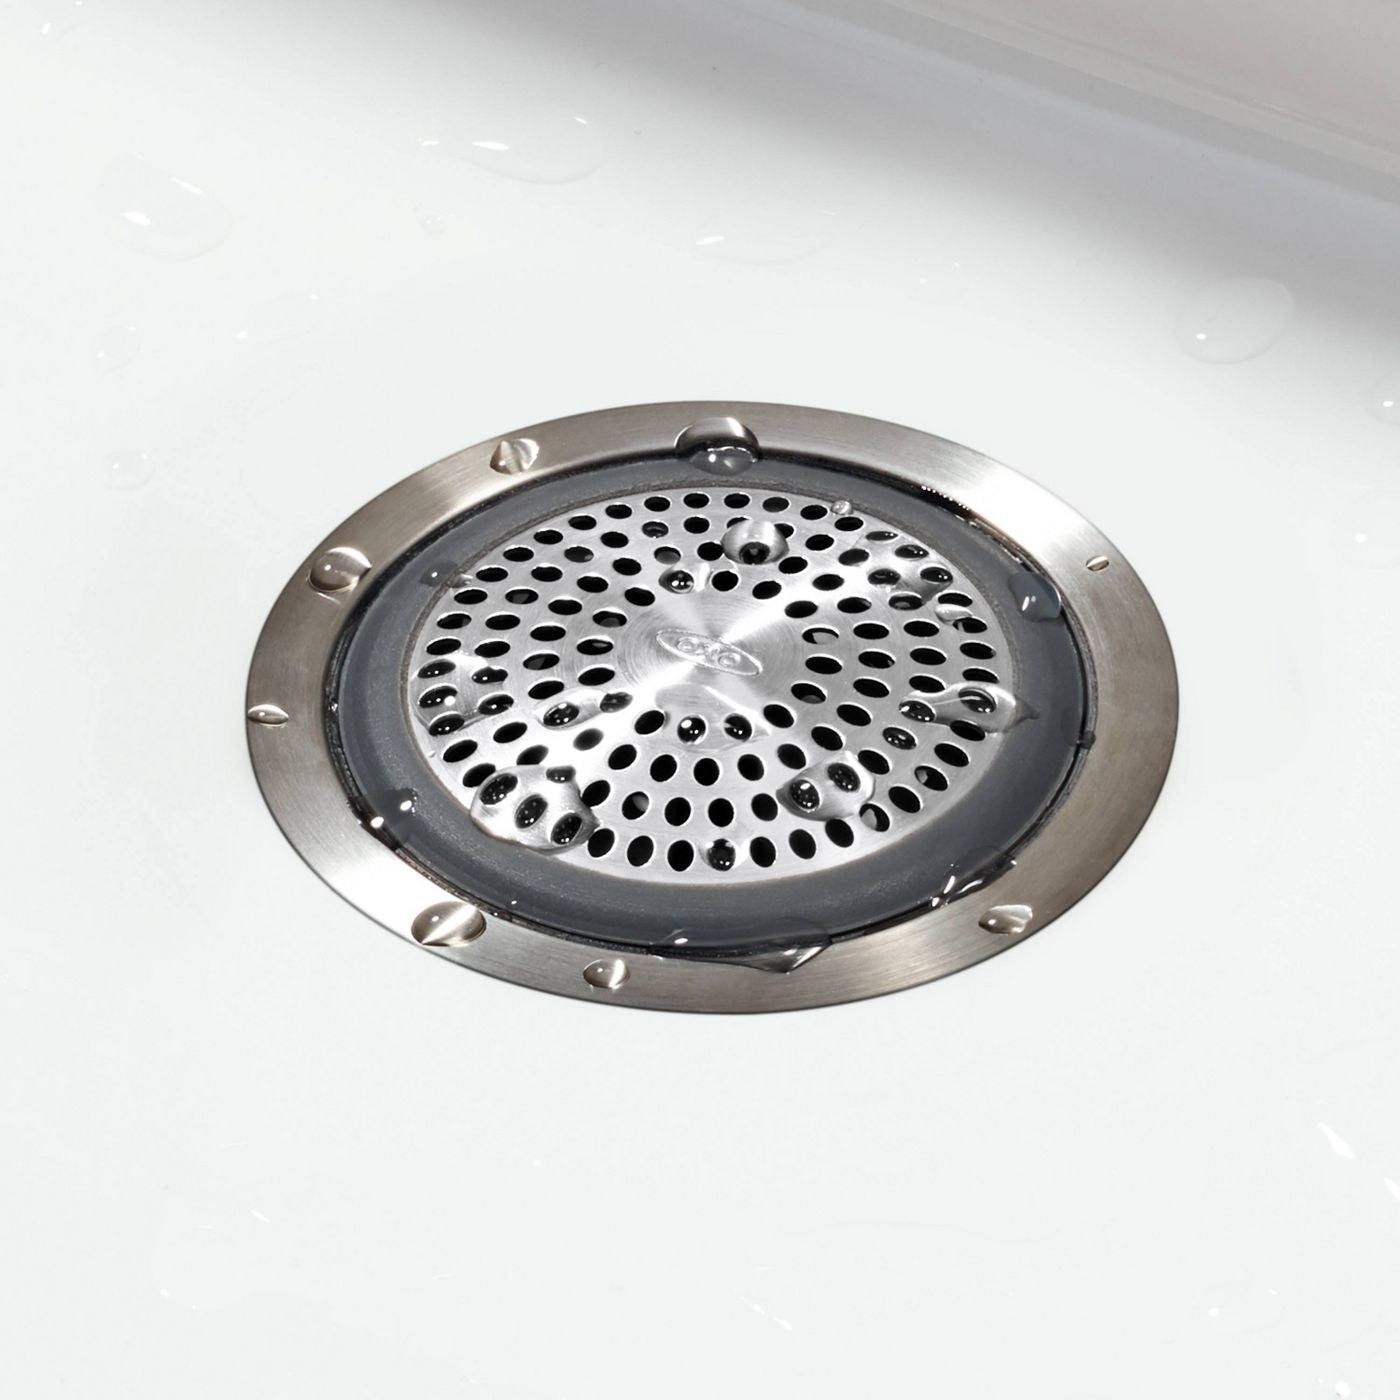 bathtub drain protector in the drain with water droplets around it